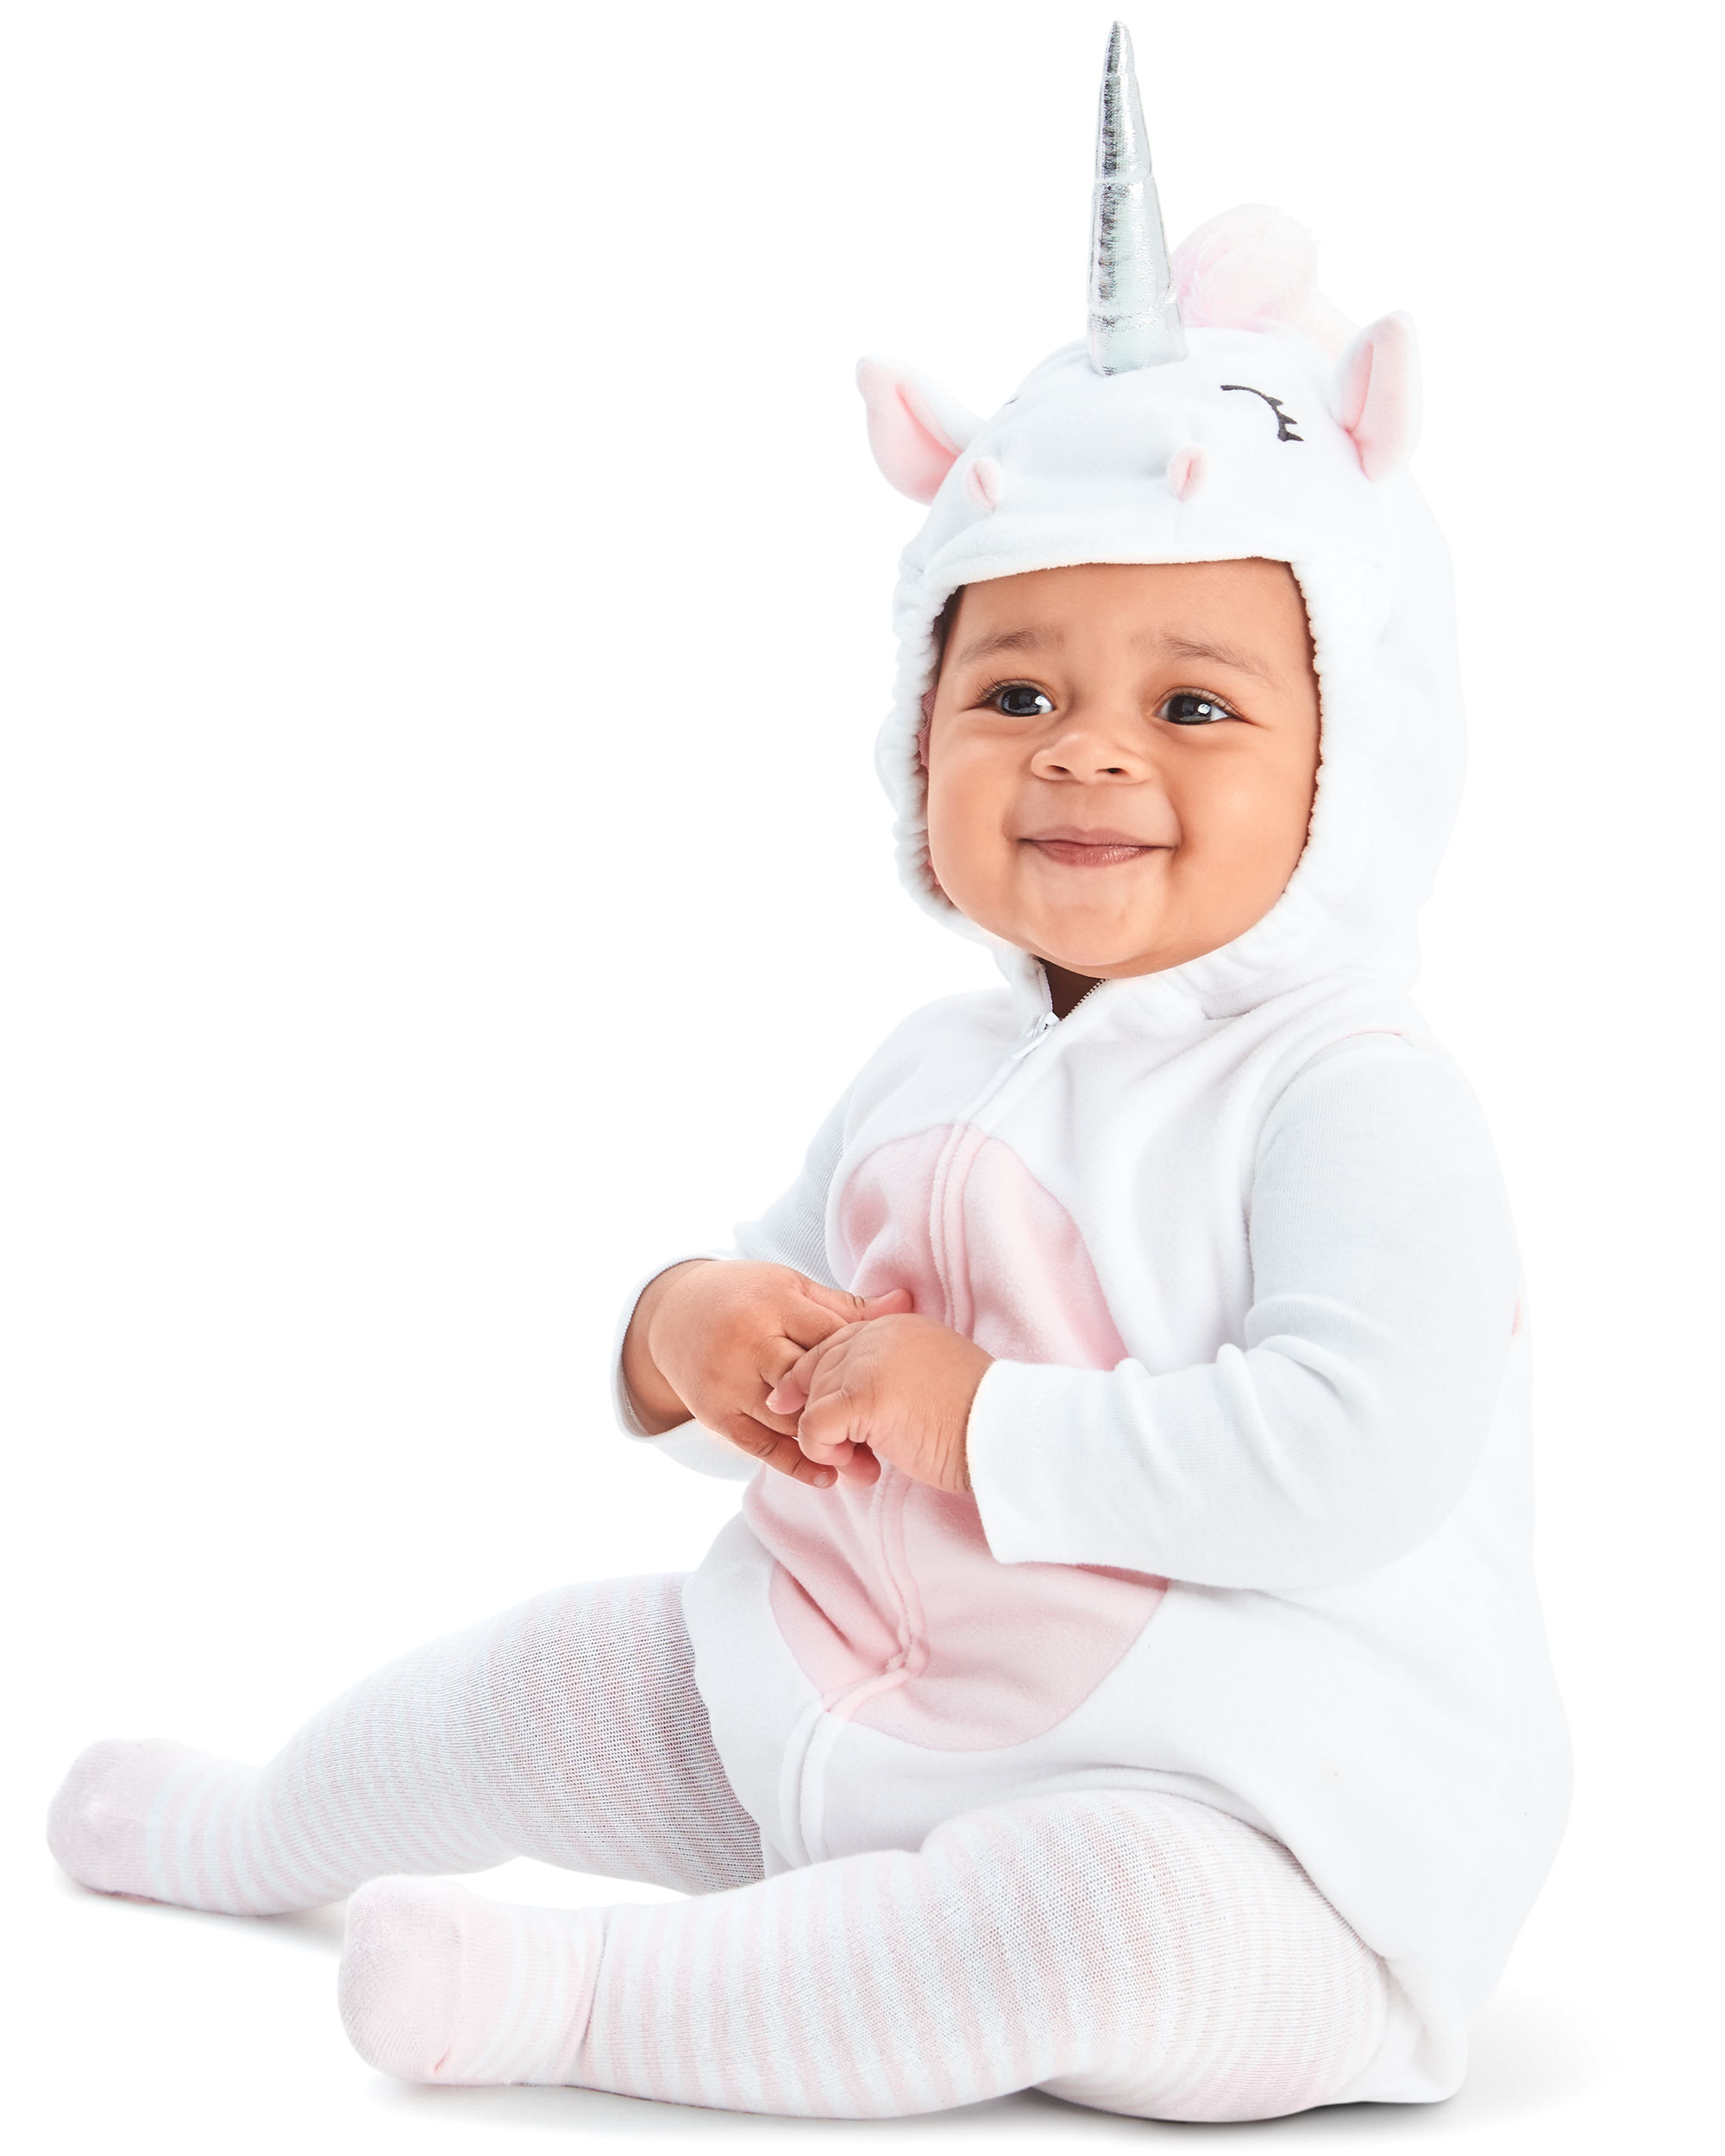 10 month old baby halloween costumes